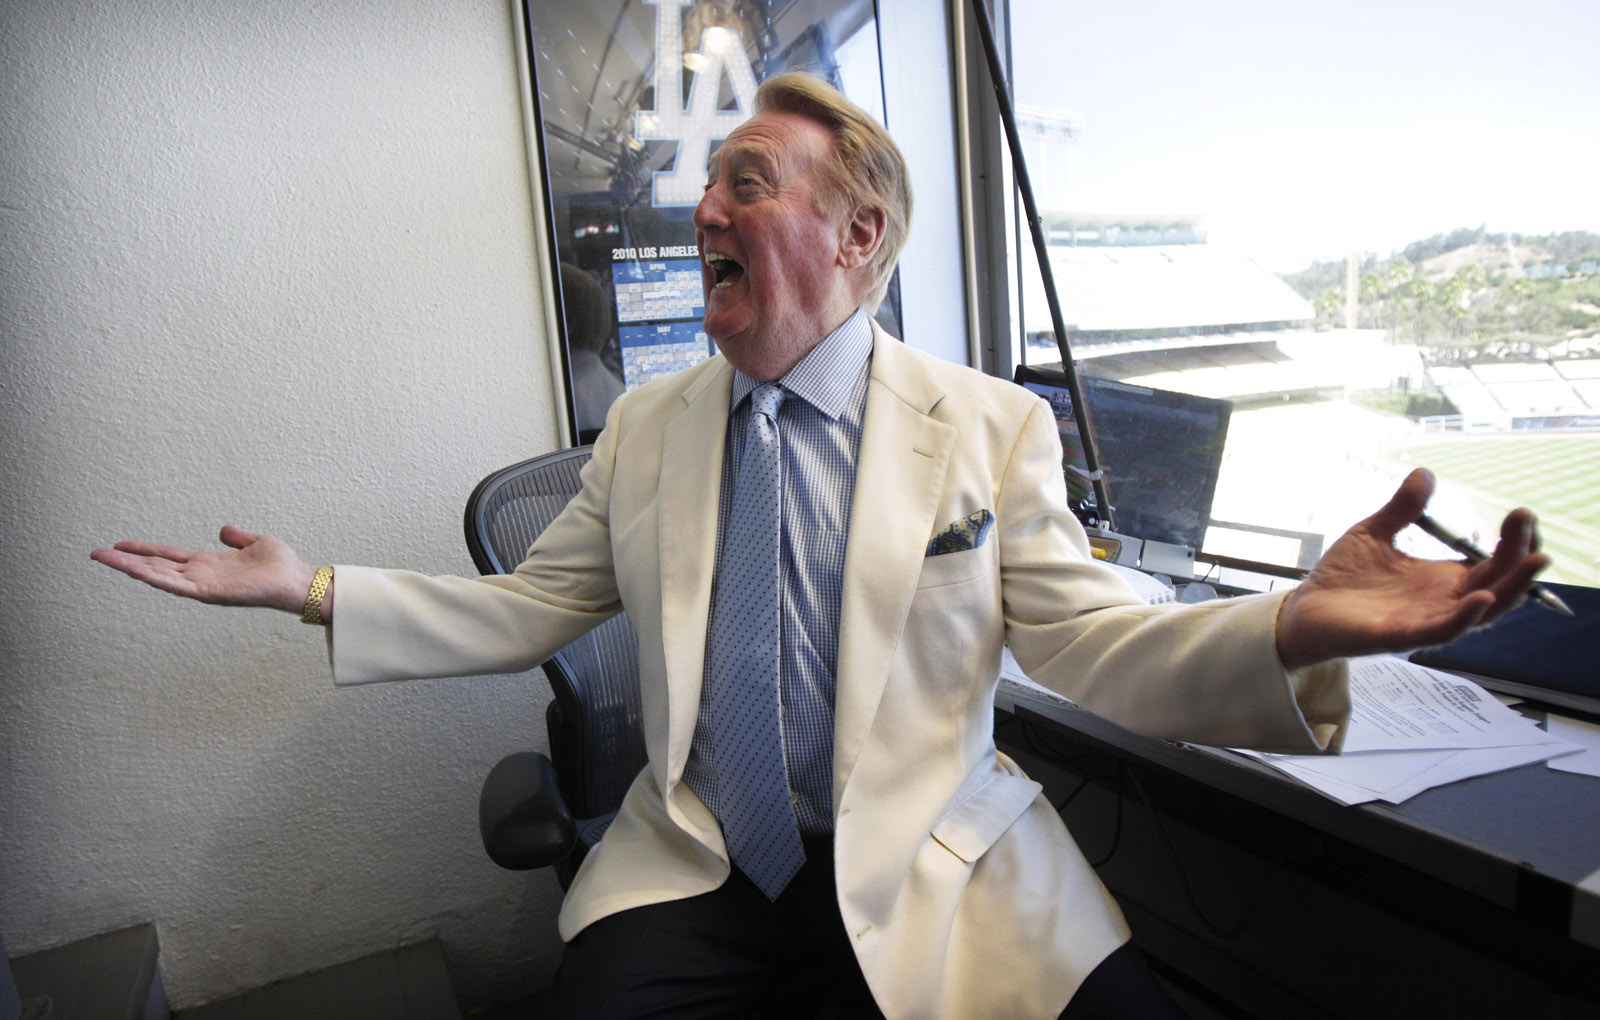 Vin Scully talks to a well-wisher in his booth at Dodger Stadium in Los Angeles, Sunday, Aug. 22, 2010. Scully will return to the broadcast booth to call Los Angeles Dodgers games next year for his 62nd season. The team said Sunday that the 82-year-old Hall-of-Famer will call all home games and road games against National League West opponents. (AP Photo/Jae C. Hong)